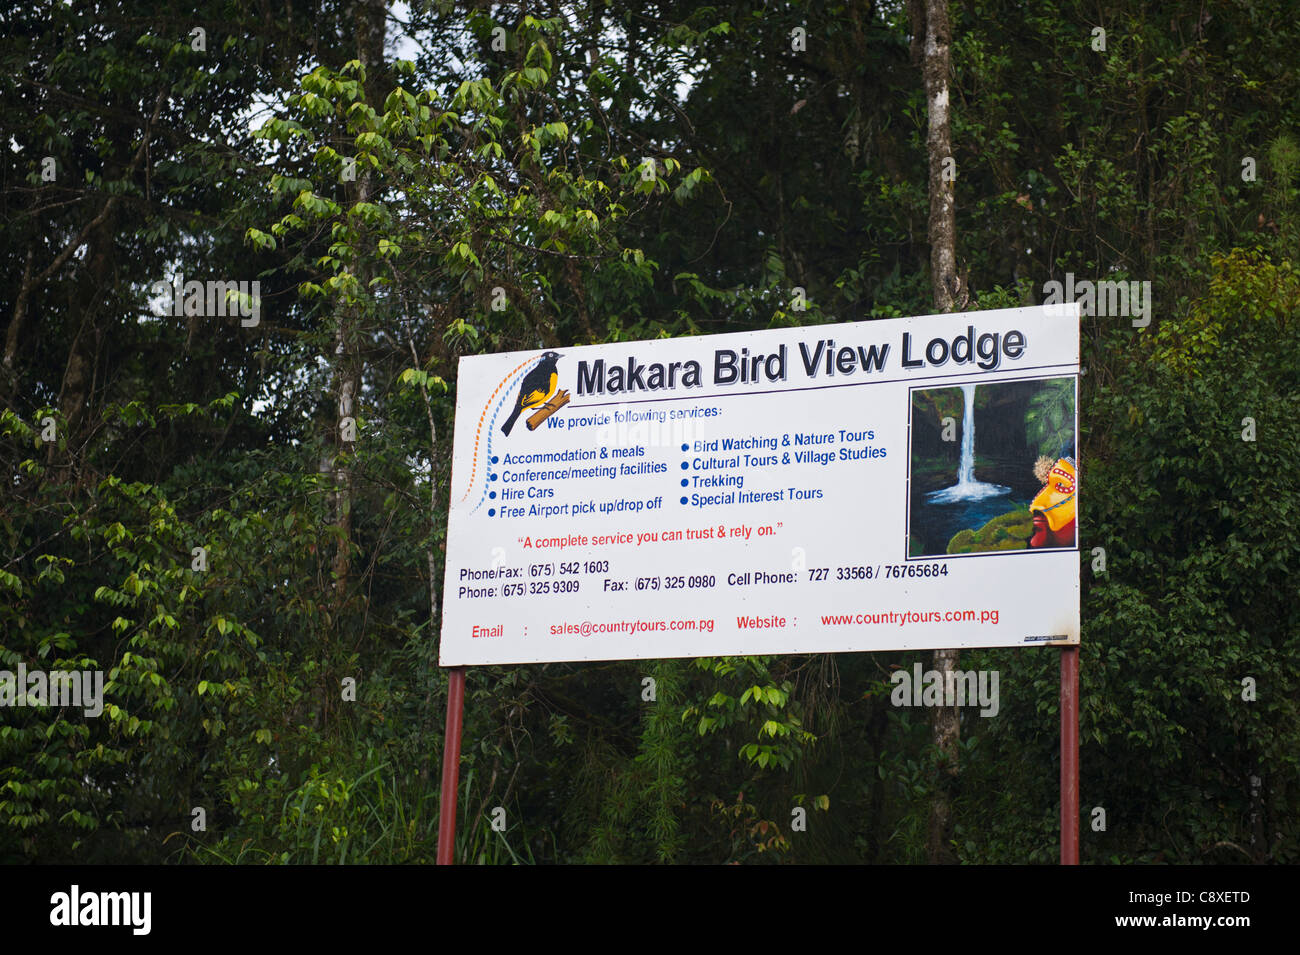 Makara Bird View Lodge Tari Southern Highlands Papouasie Nouvelle Guinée Banque D'Images